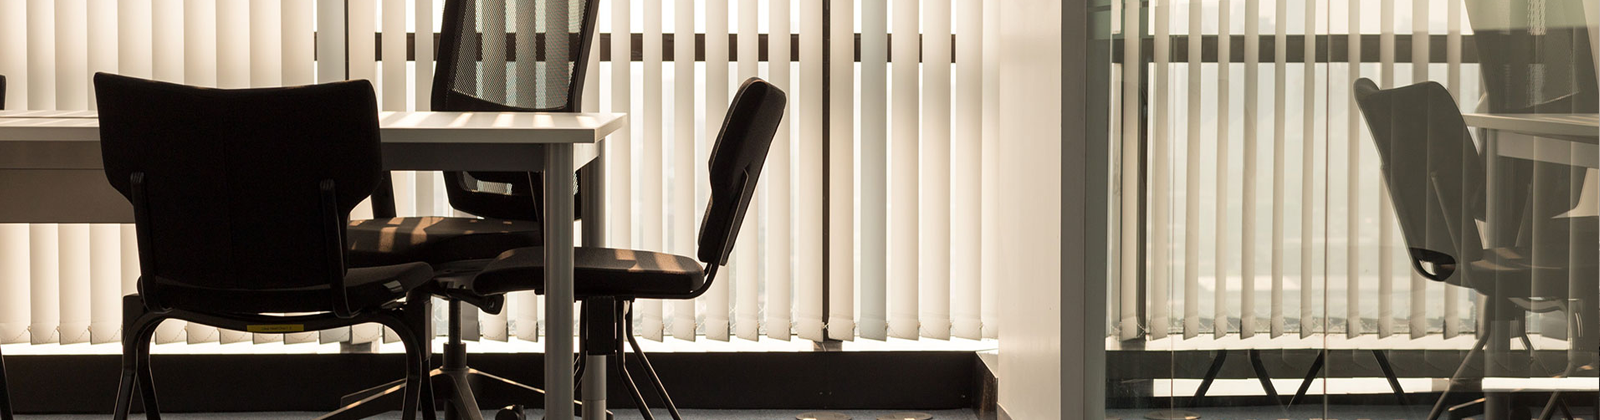 vertical blinds for office space